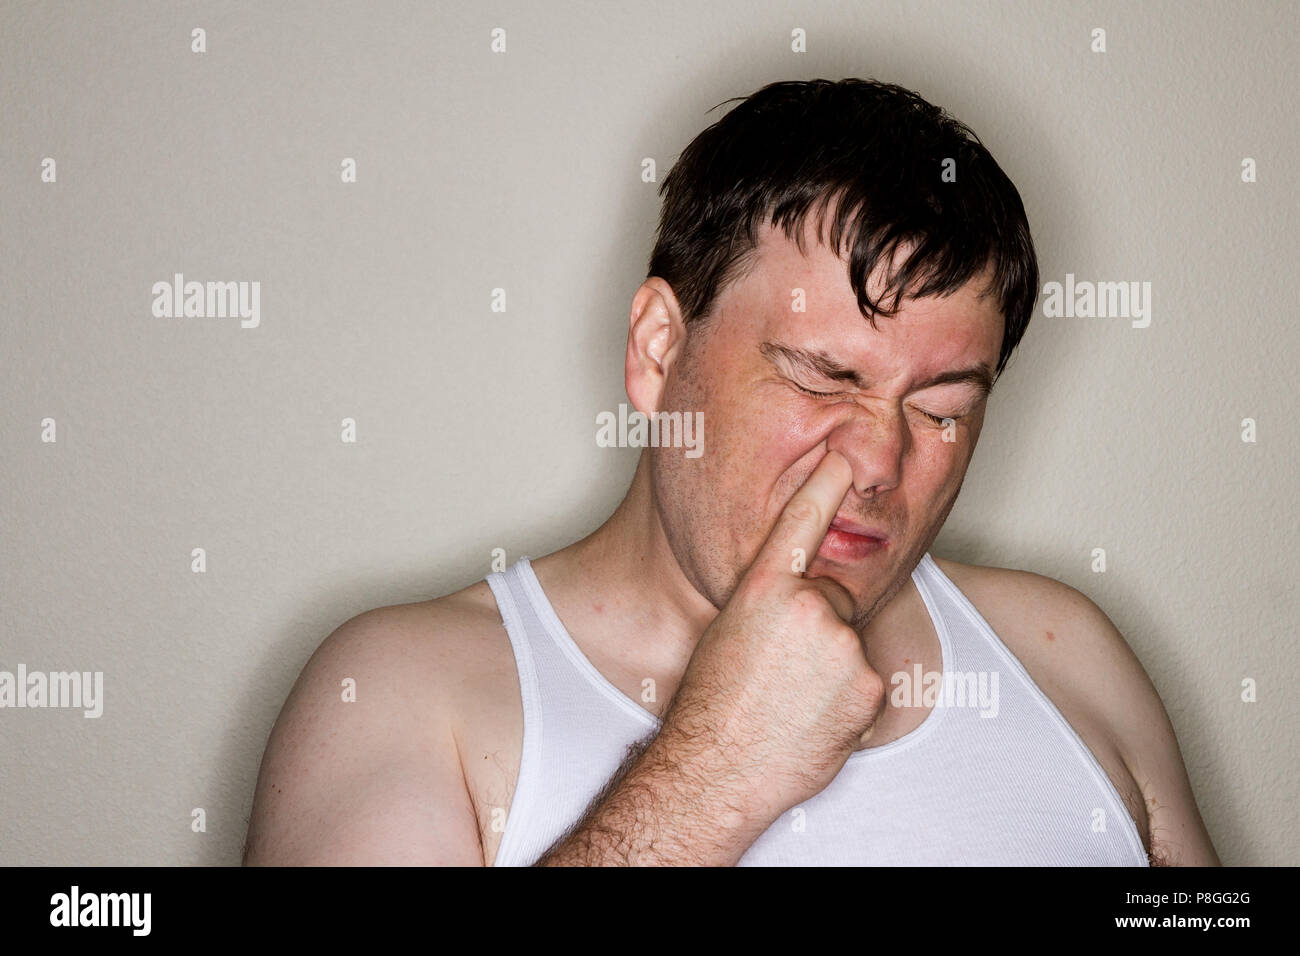 Man being lit with a ring flash standing up against a wall trying to be disgusting an pick a booger out of his nose Stock Photo